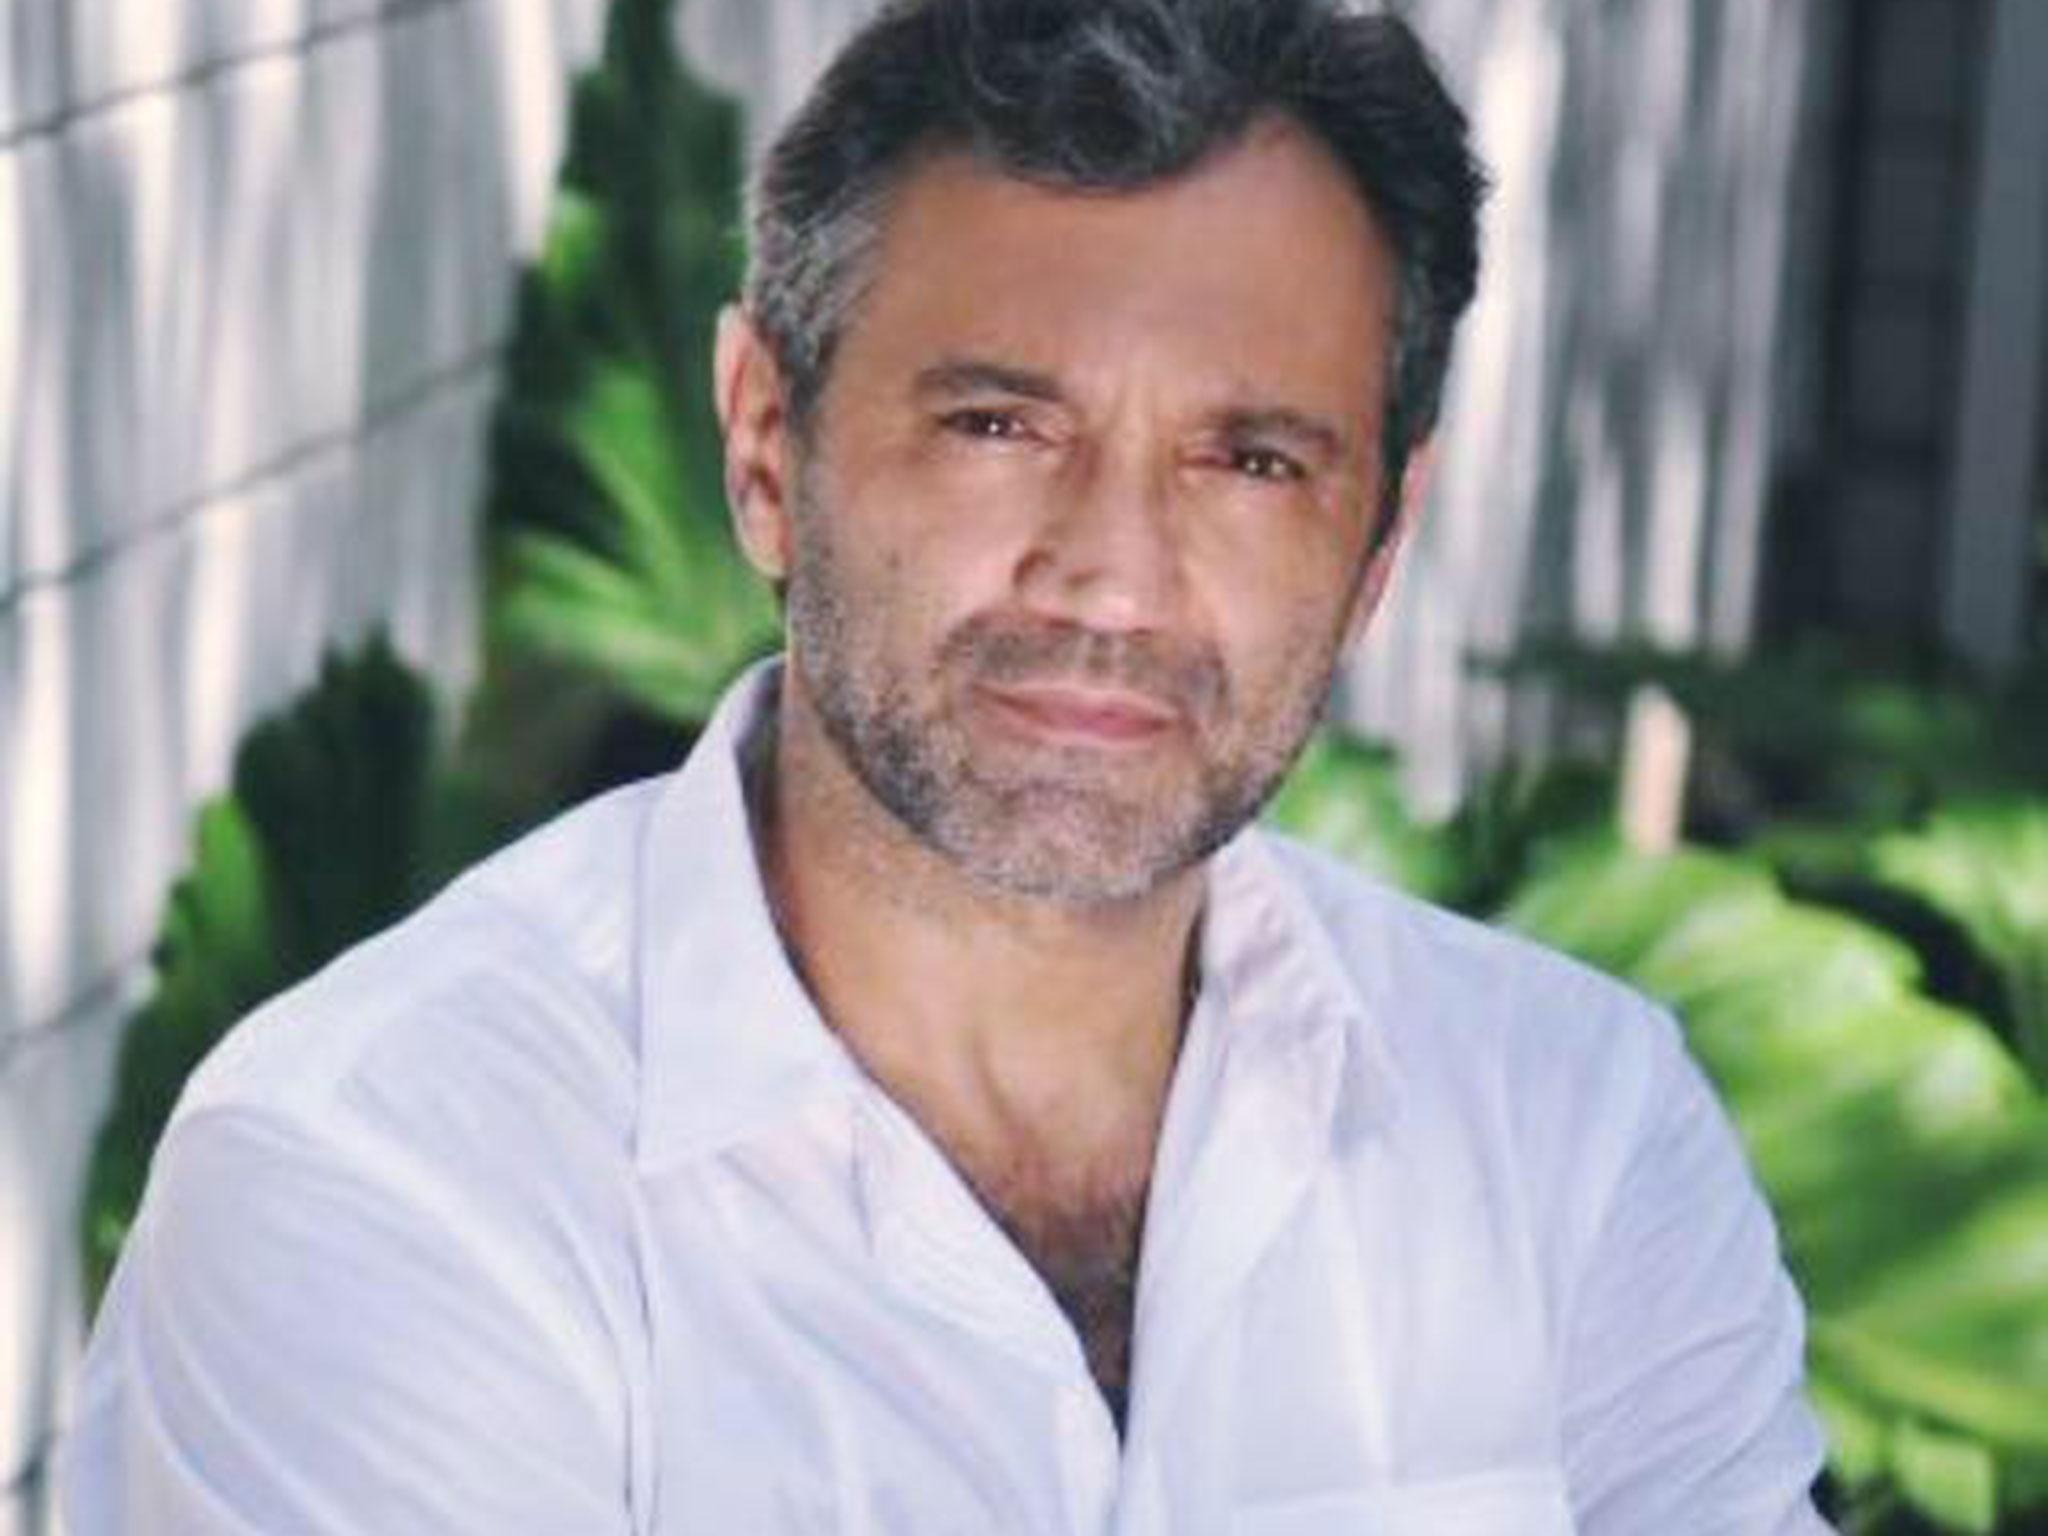 Brazilian actor Domingos Montagner drowns in river near set of TV show ...